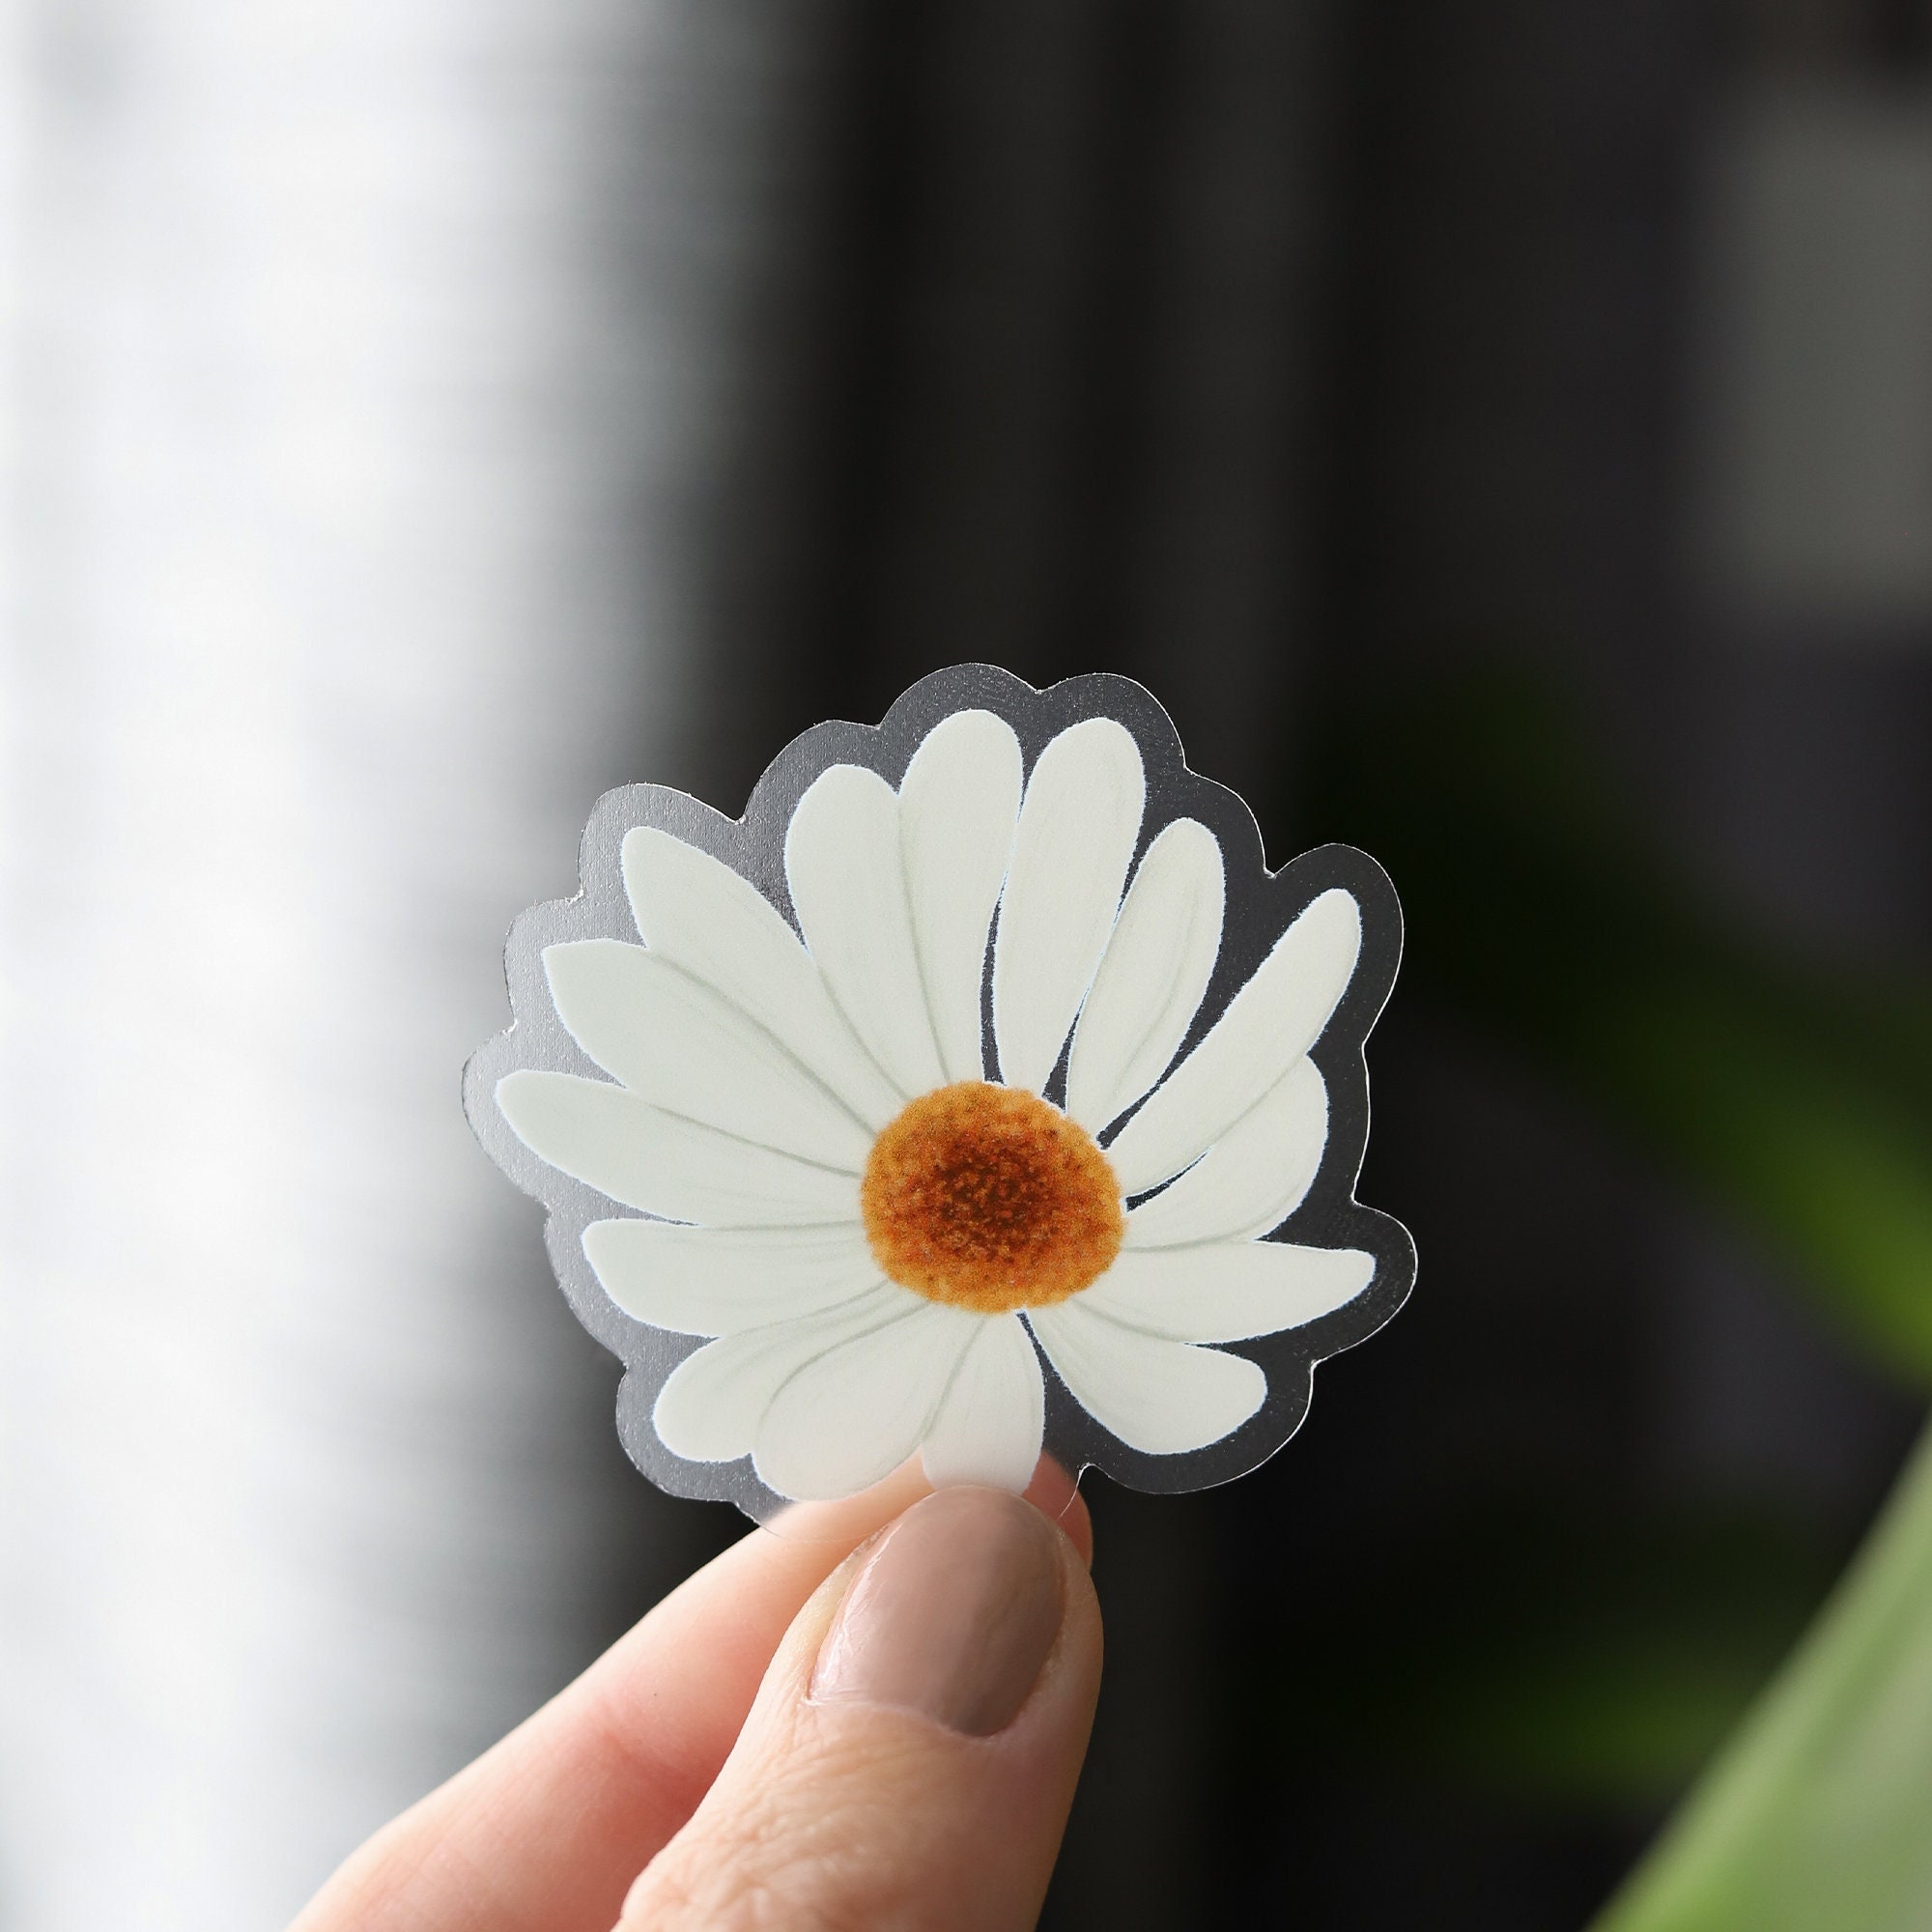 Cute Happy Daisy Stickers 1 Small Flower Smiling Daisy Stickers to Decorate  Your Phone, Water Bottle, Laptop CLEAR Vinyl Daisy Sticker Pack 